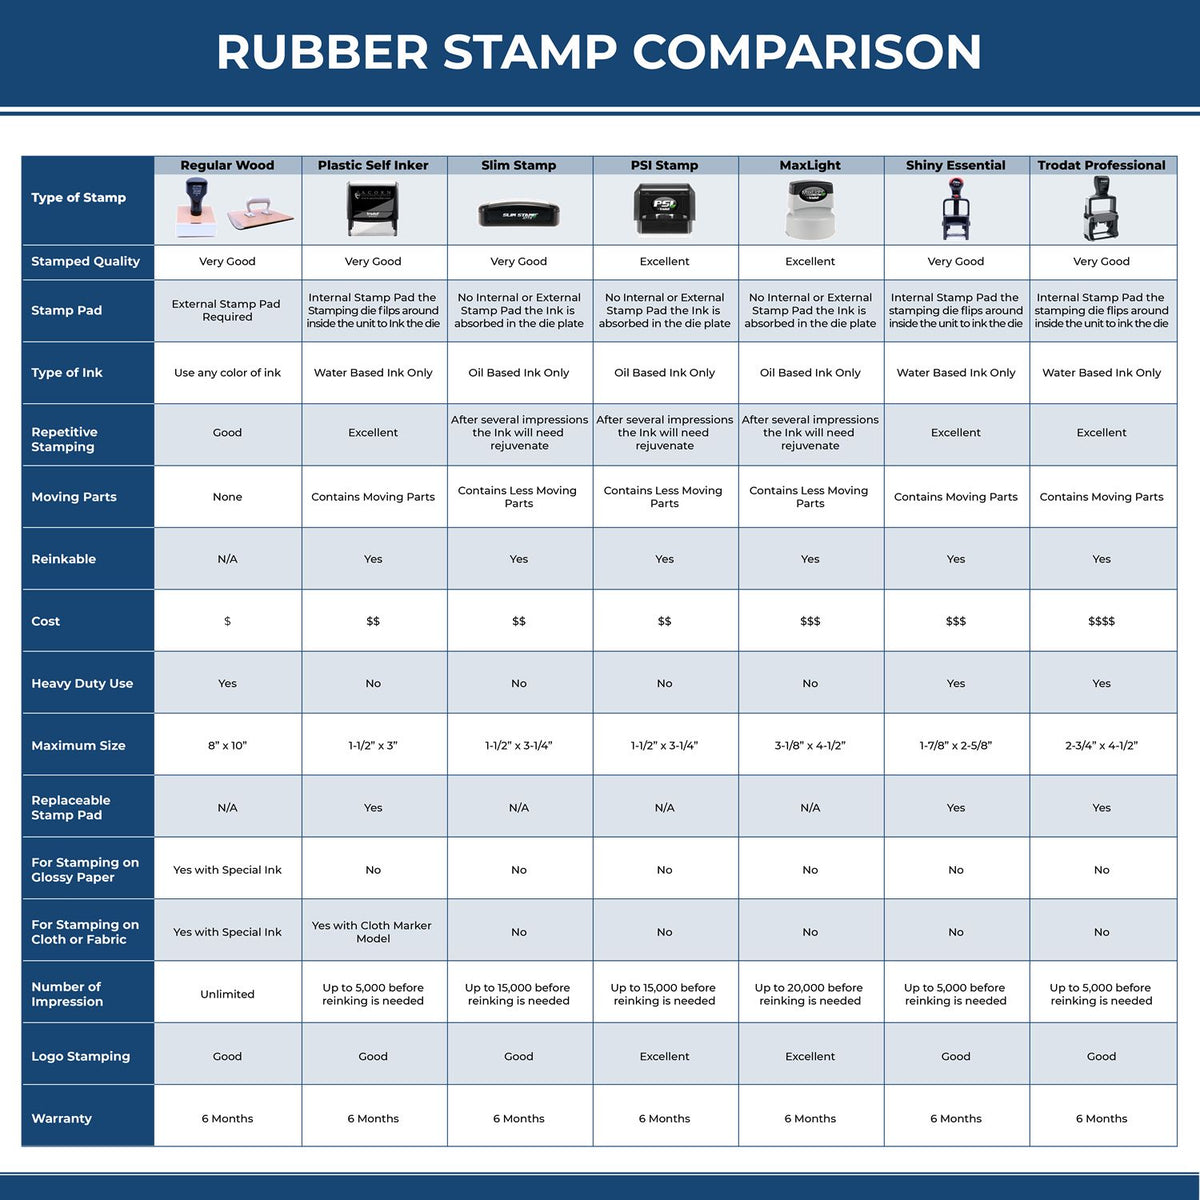 Large Self-Inking Perfect Stamp 5617S Rubber Stamp Comparison